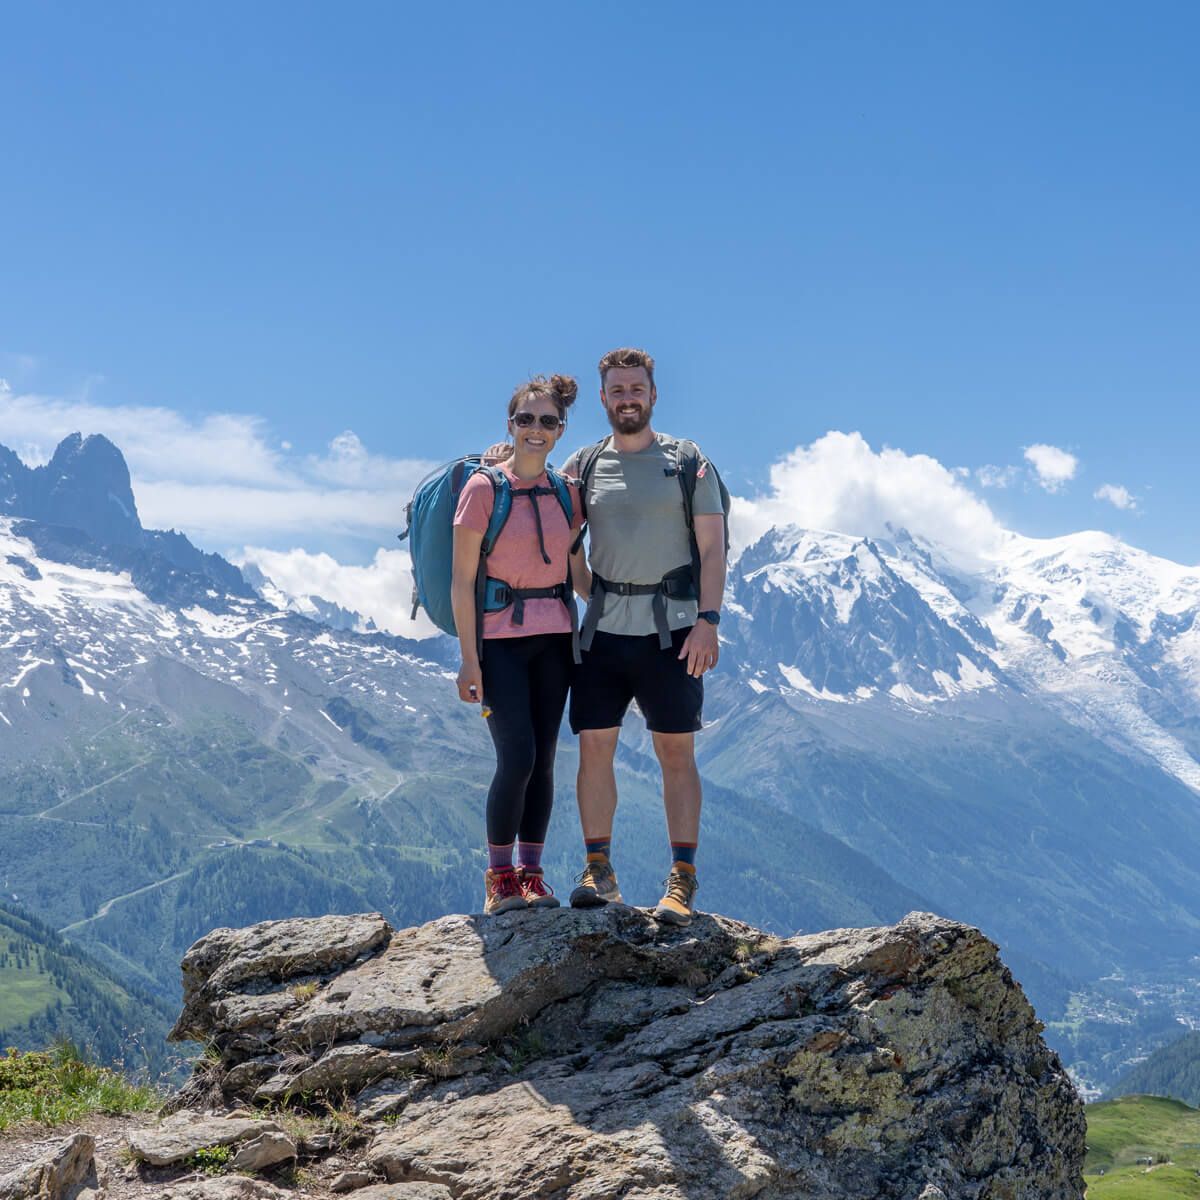 Mark and Kristen Morgan from Where Are Those Morgans hiking together in the French Alps